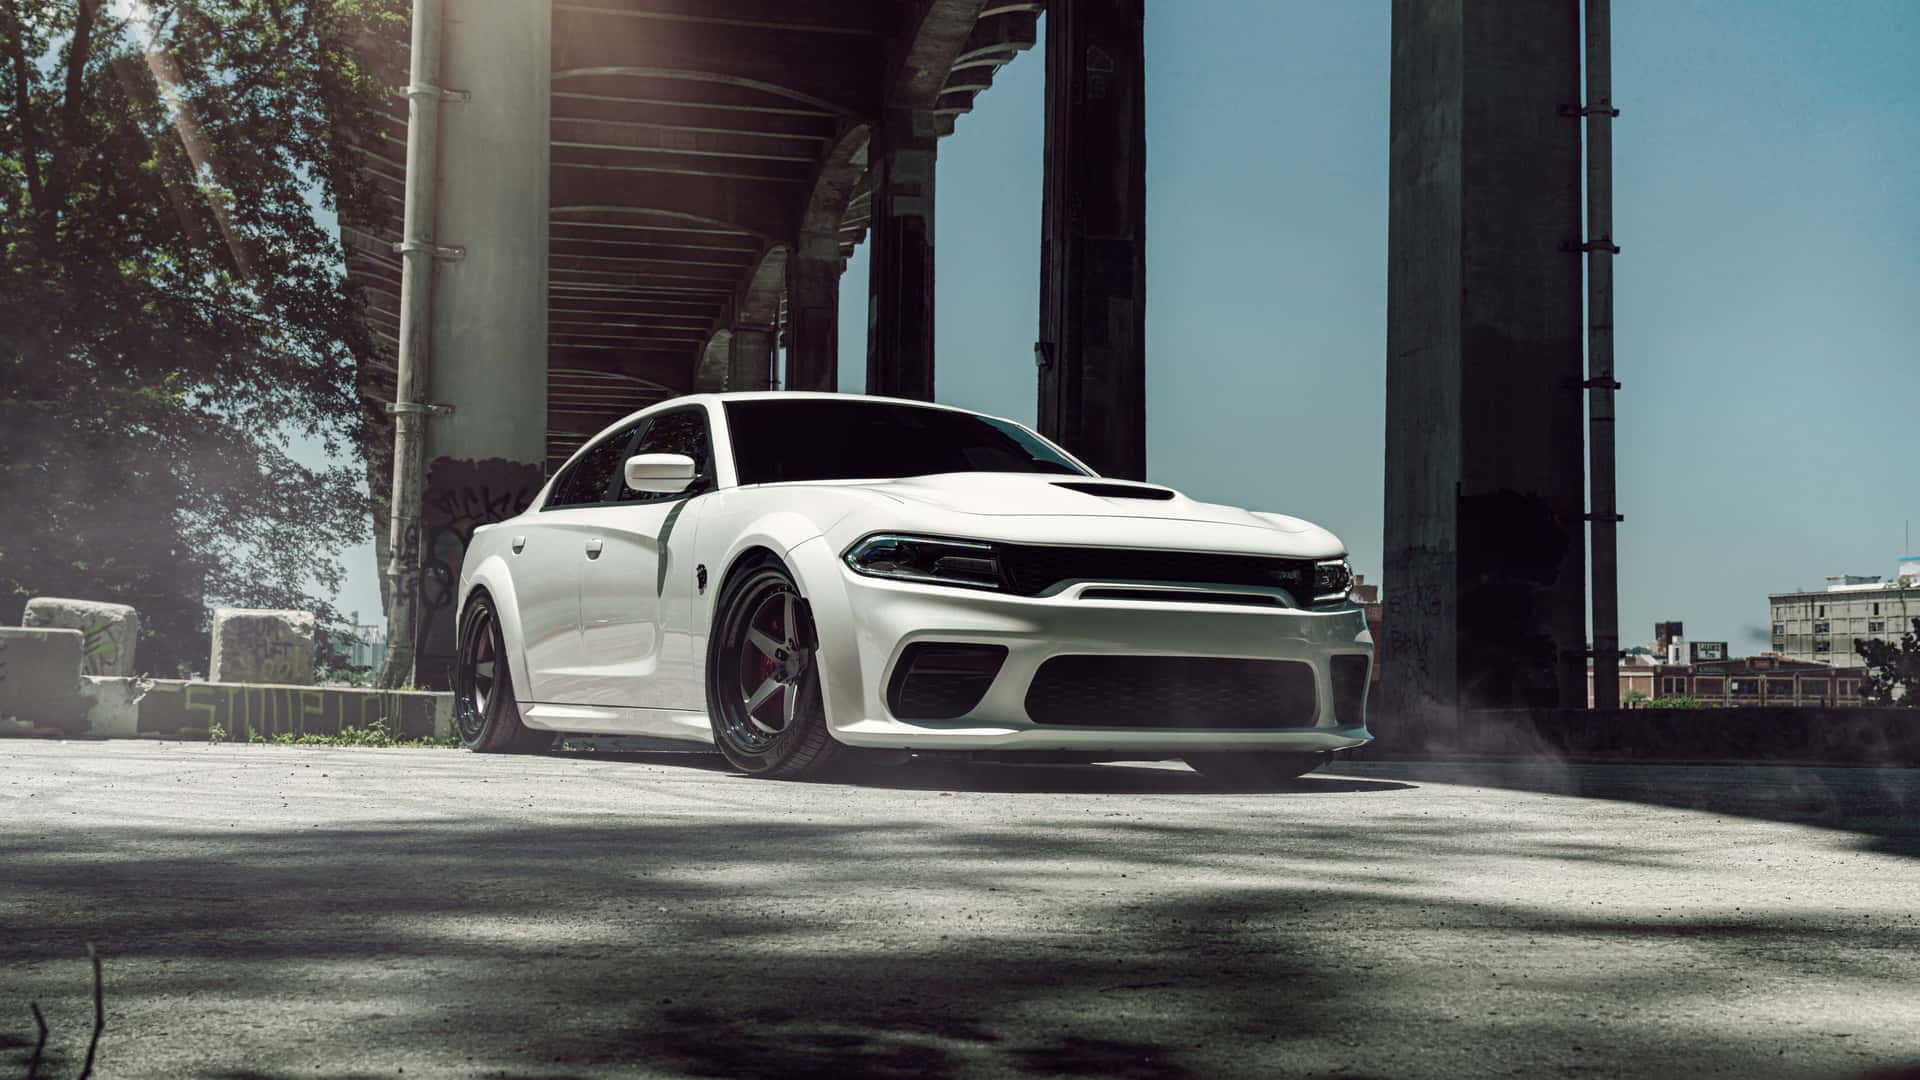 Experience Aggressive Speed And Power With The Dodge Hellcat